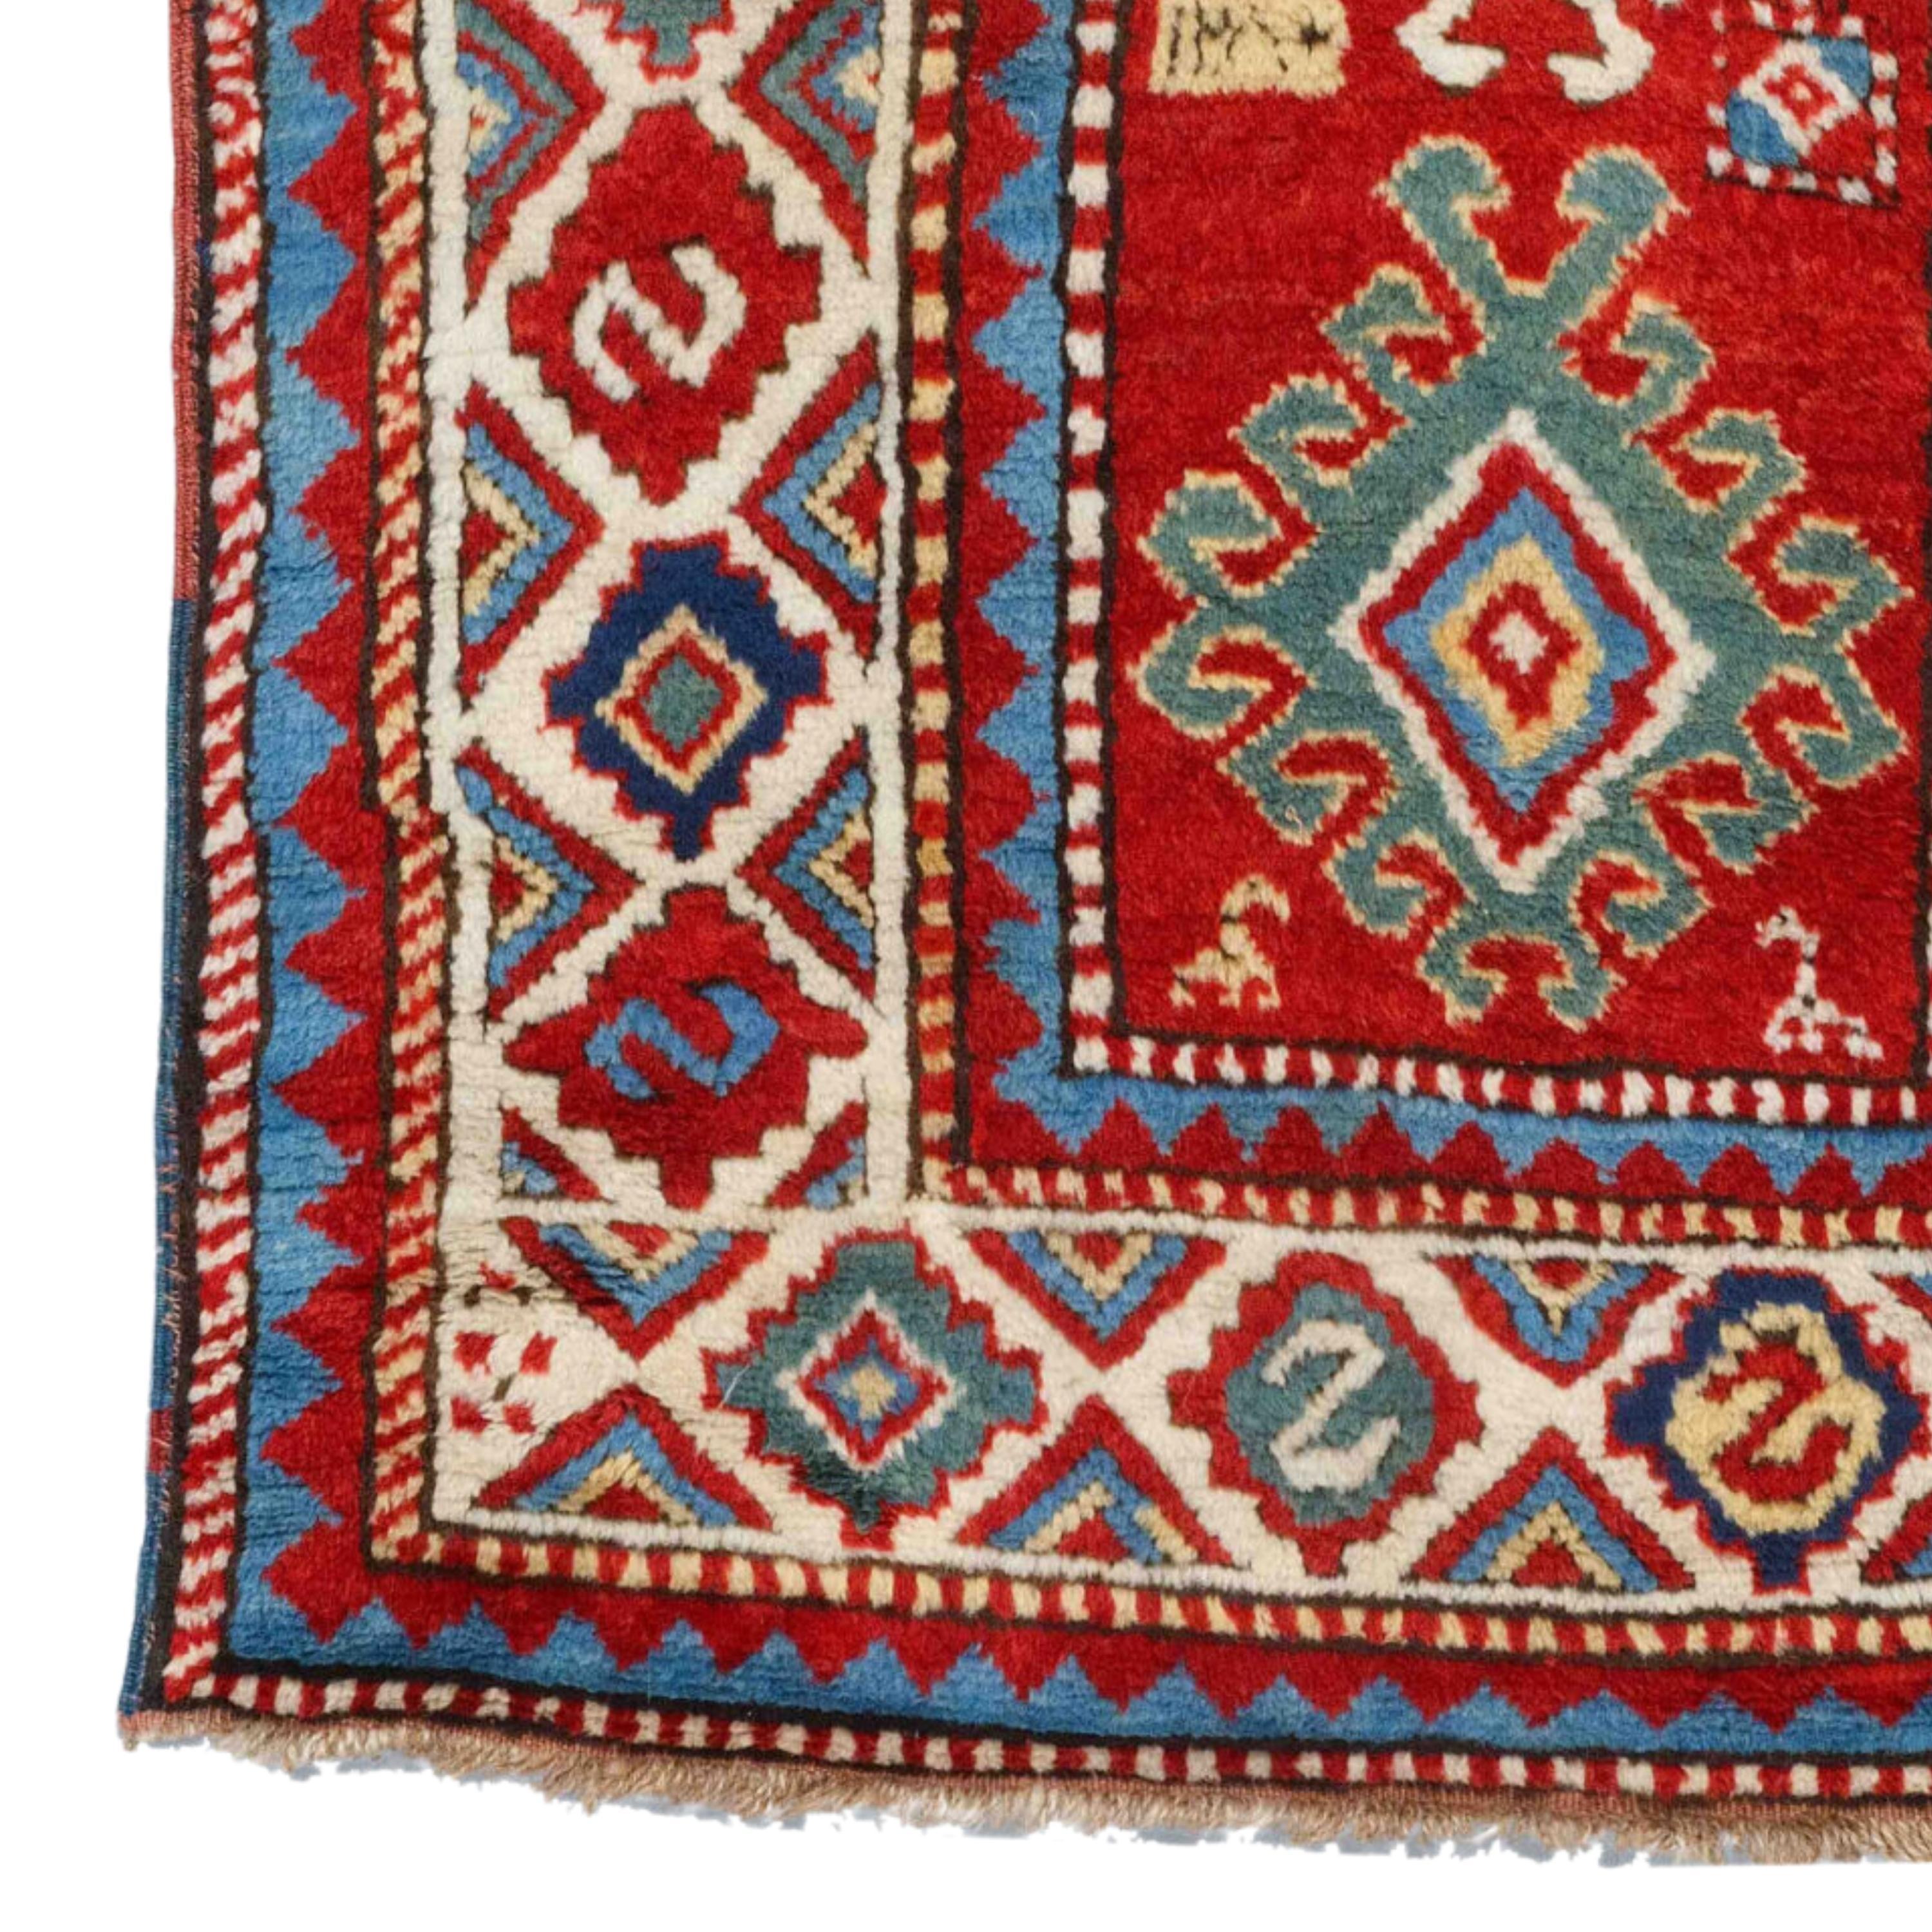 Antique Caucasian Bordjalo Rug was woven from the mid-19th century to the early 20th century. These carpets have a significant value in terms of their weaving technique, color selection and pattern richness.

Middle of 19th Century Caucasian